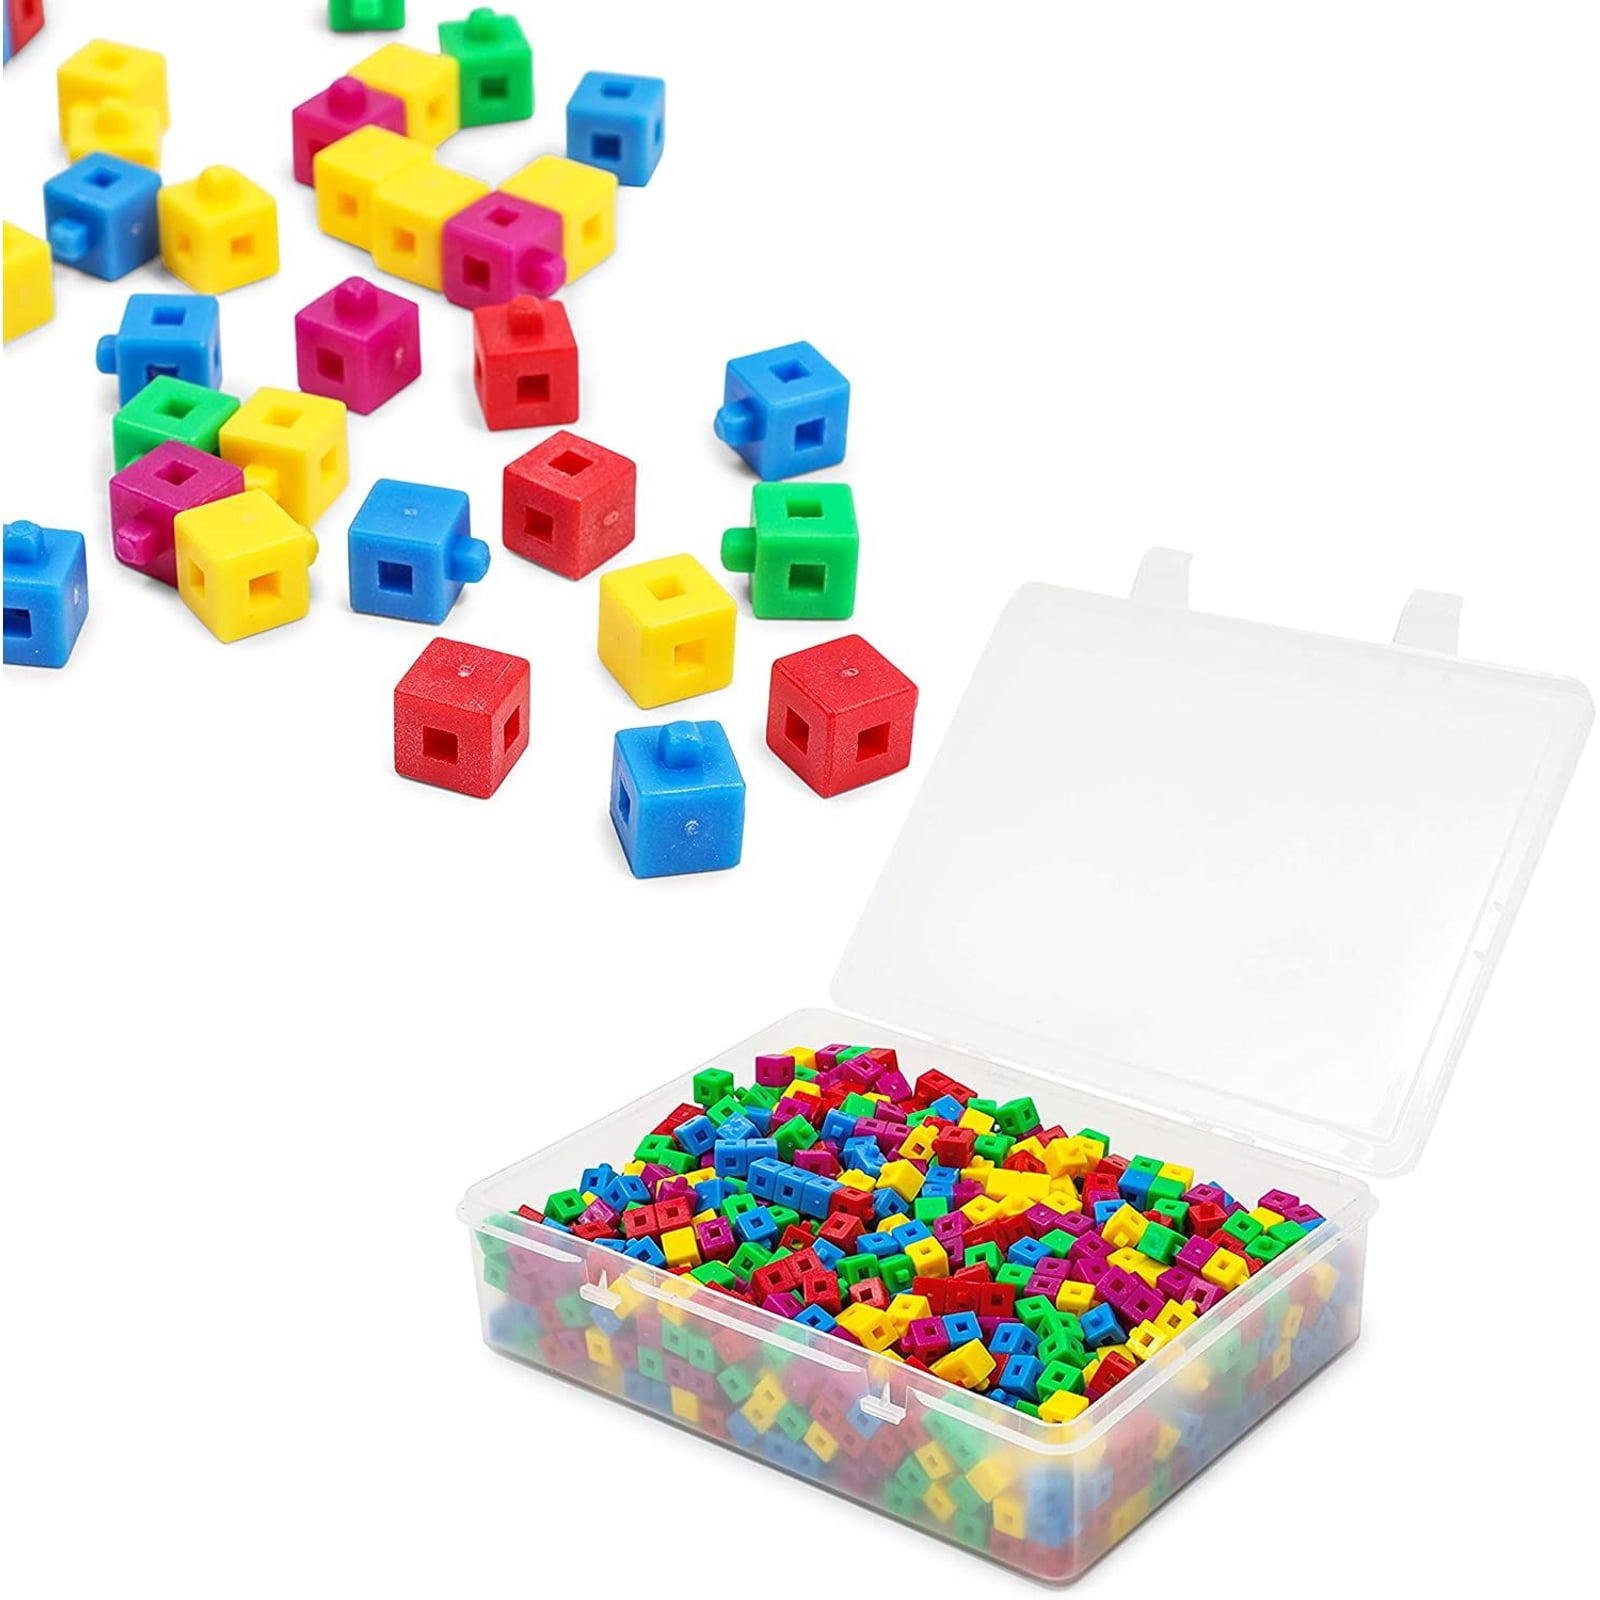 Snap Pop Cubes for Math Counting set of 100-10 colors each set 